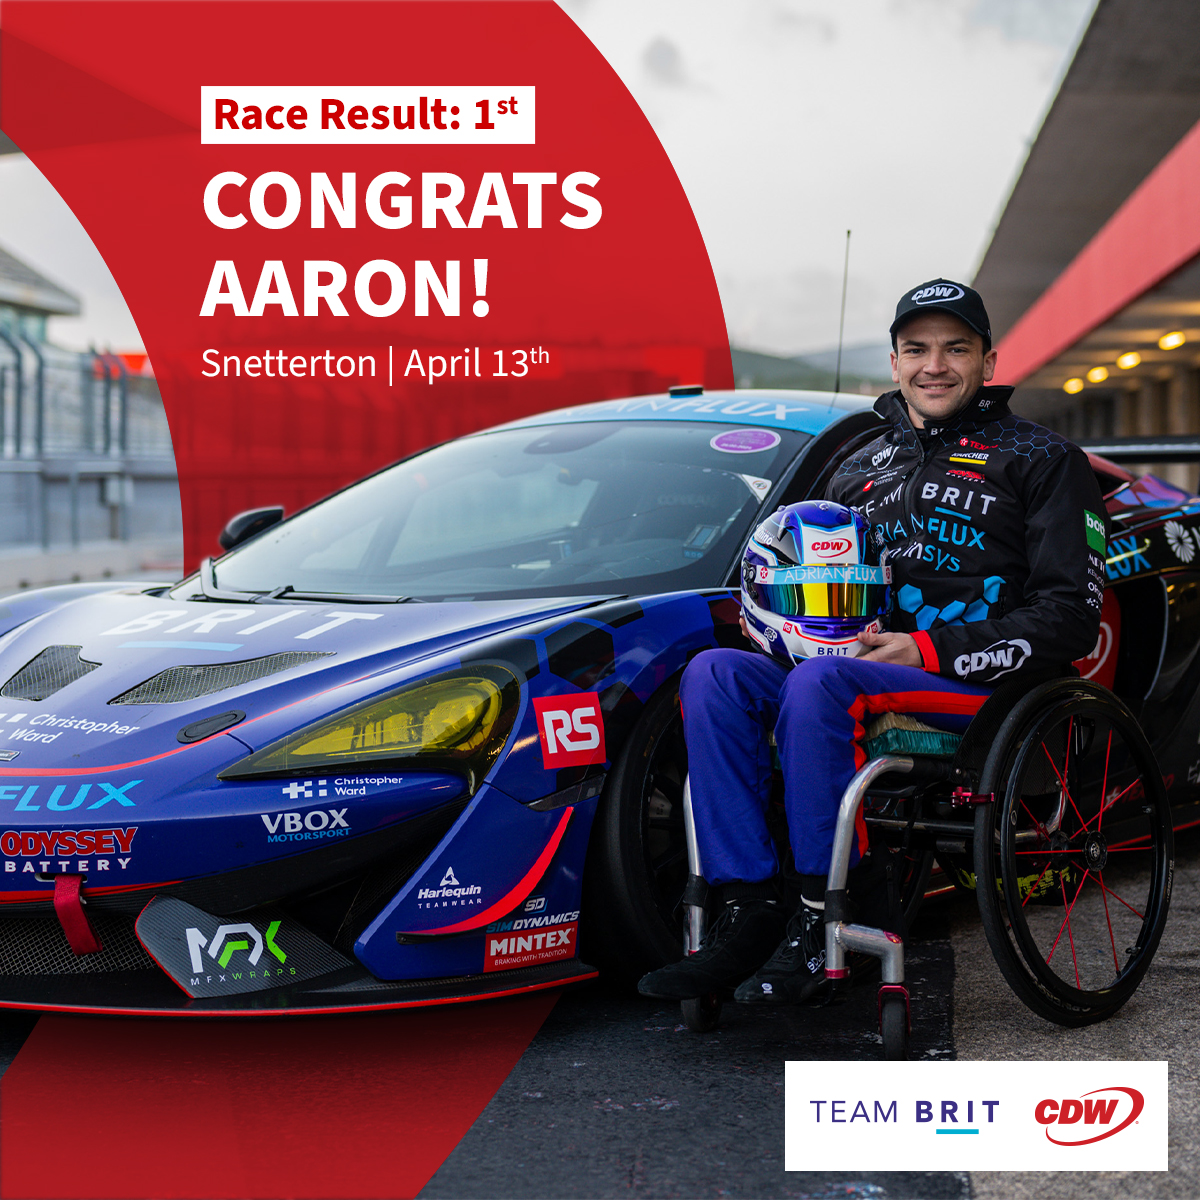 What a thrilling race at Snetterton! Huge congratulations to @aaronmorganrace and Paul Fullick for their sensational performance, securing P1 in style this weekend! It’s on to Silverstone in June next. Good luck Aaron and the rest of Team BRIT!